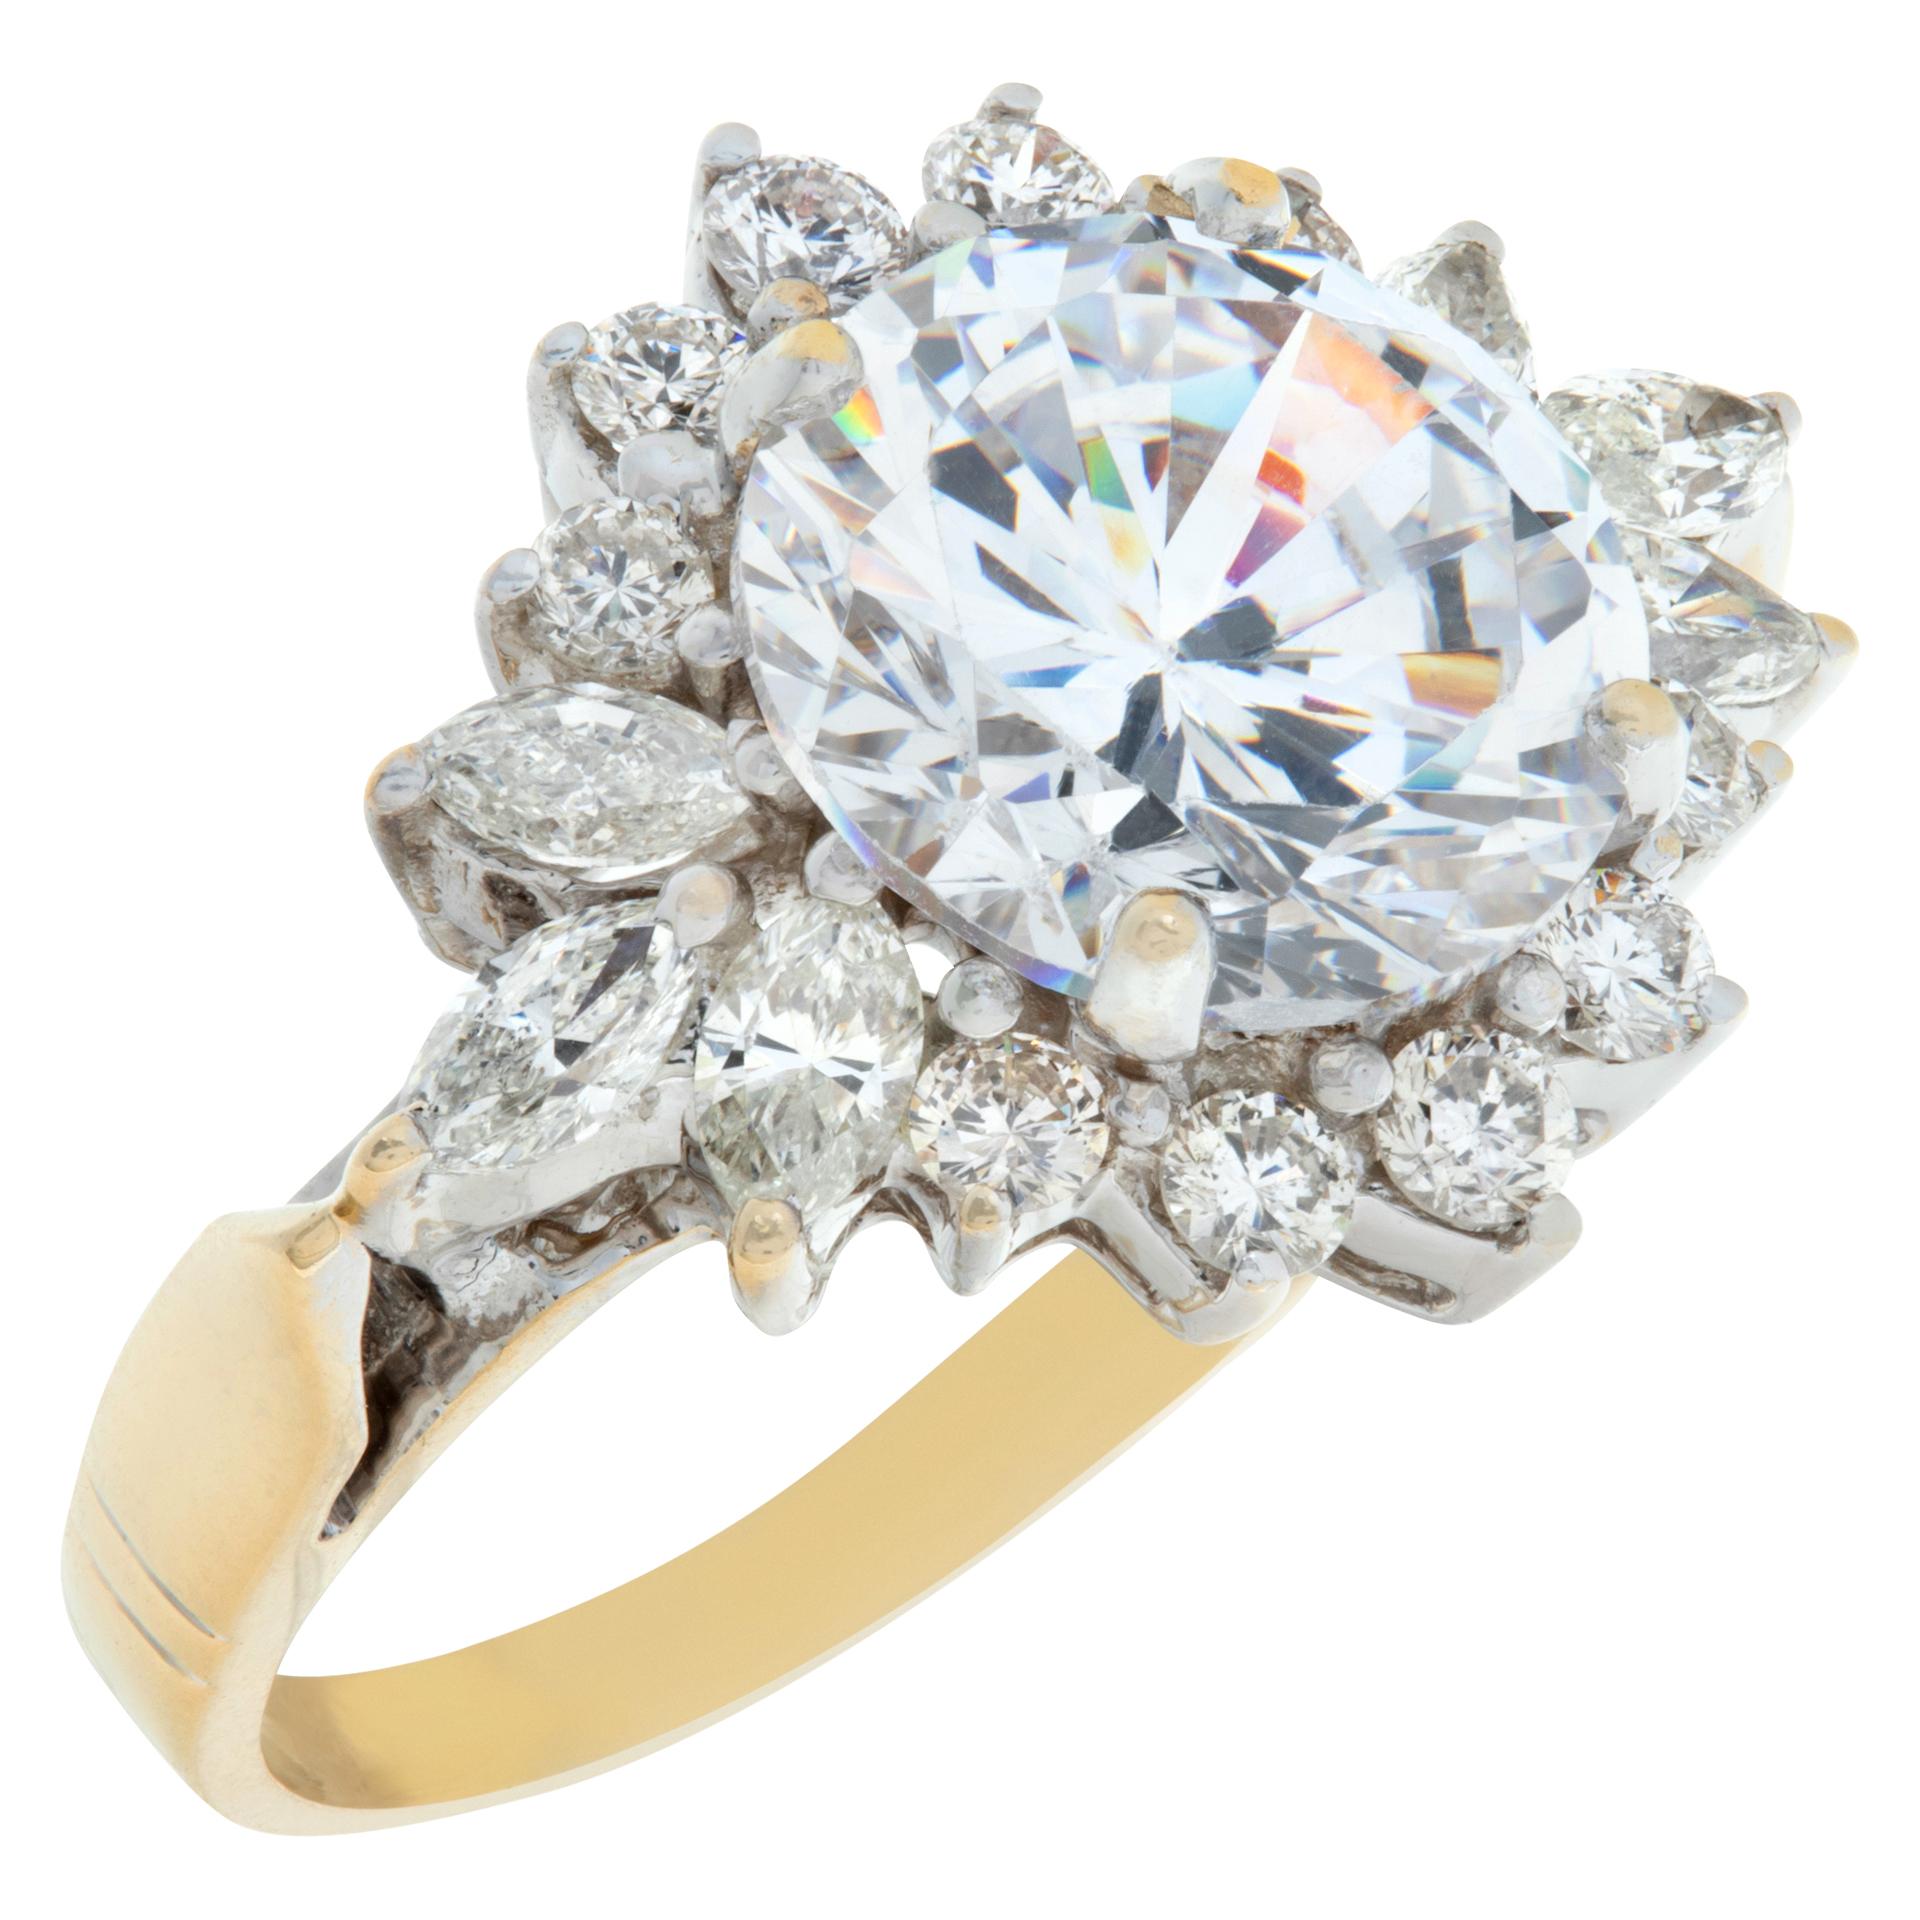 Brilliant Cut GIA Certified 3.04 Carat Round Cut Diamond 18k White and Yellow Gold Ring For Sale